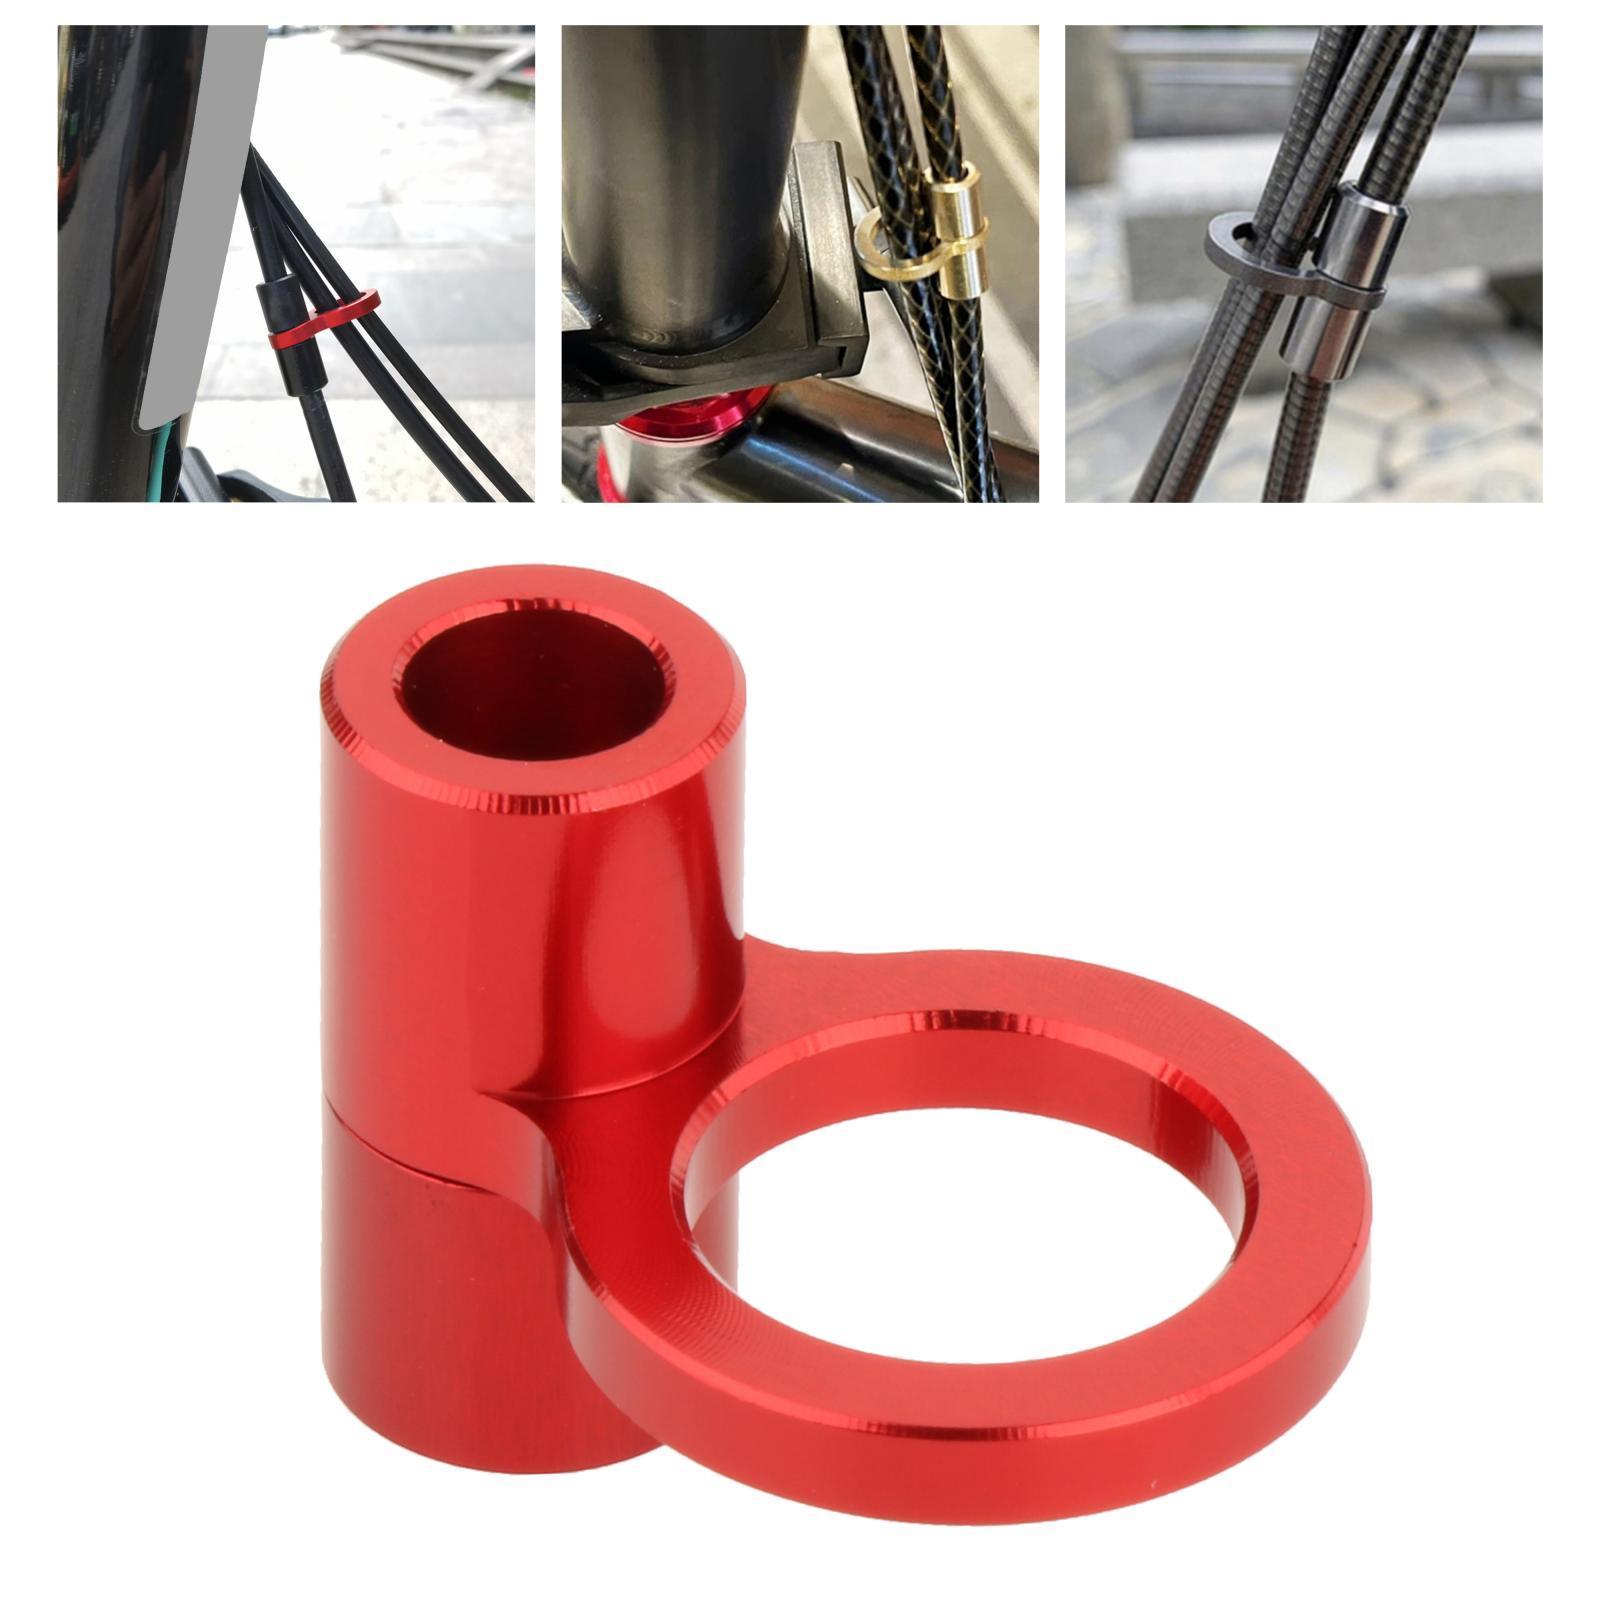 2x  Oil Tube   Clamp Housing Hose  Tube Wire Cables for Folding Bike Cycling Accessories Gear